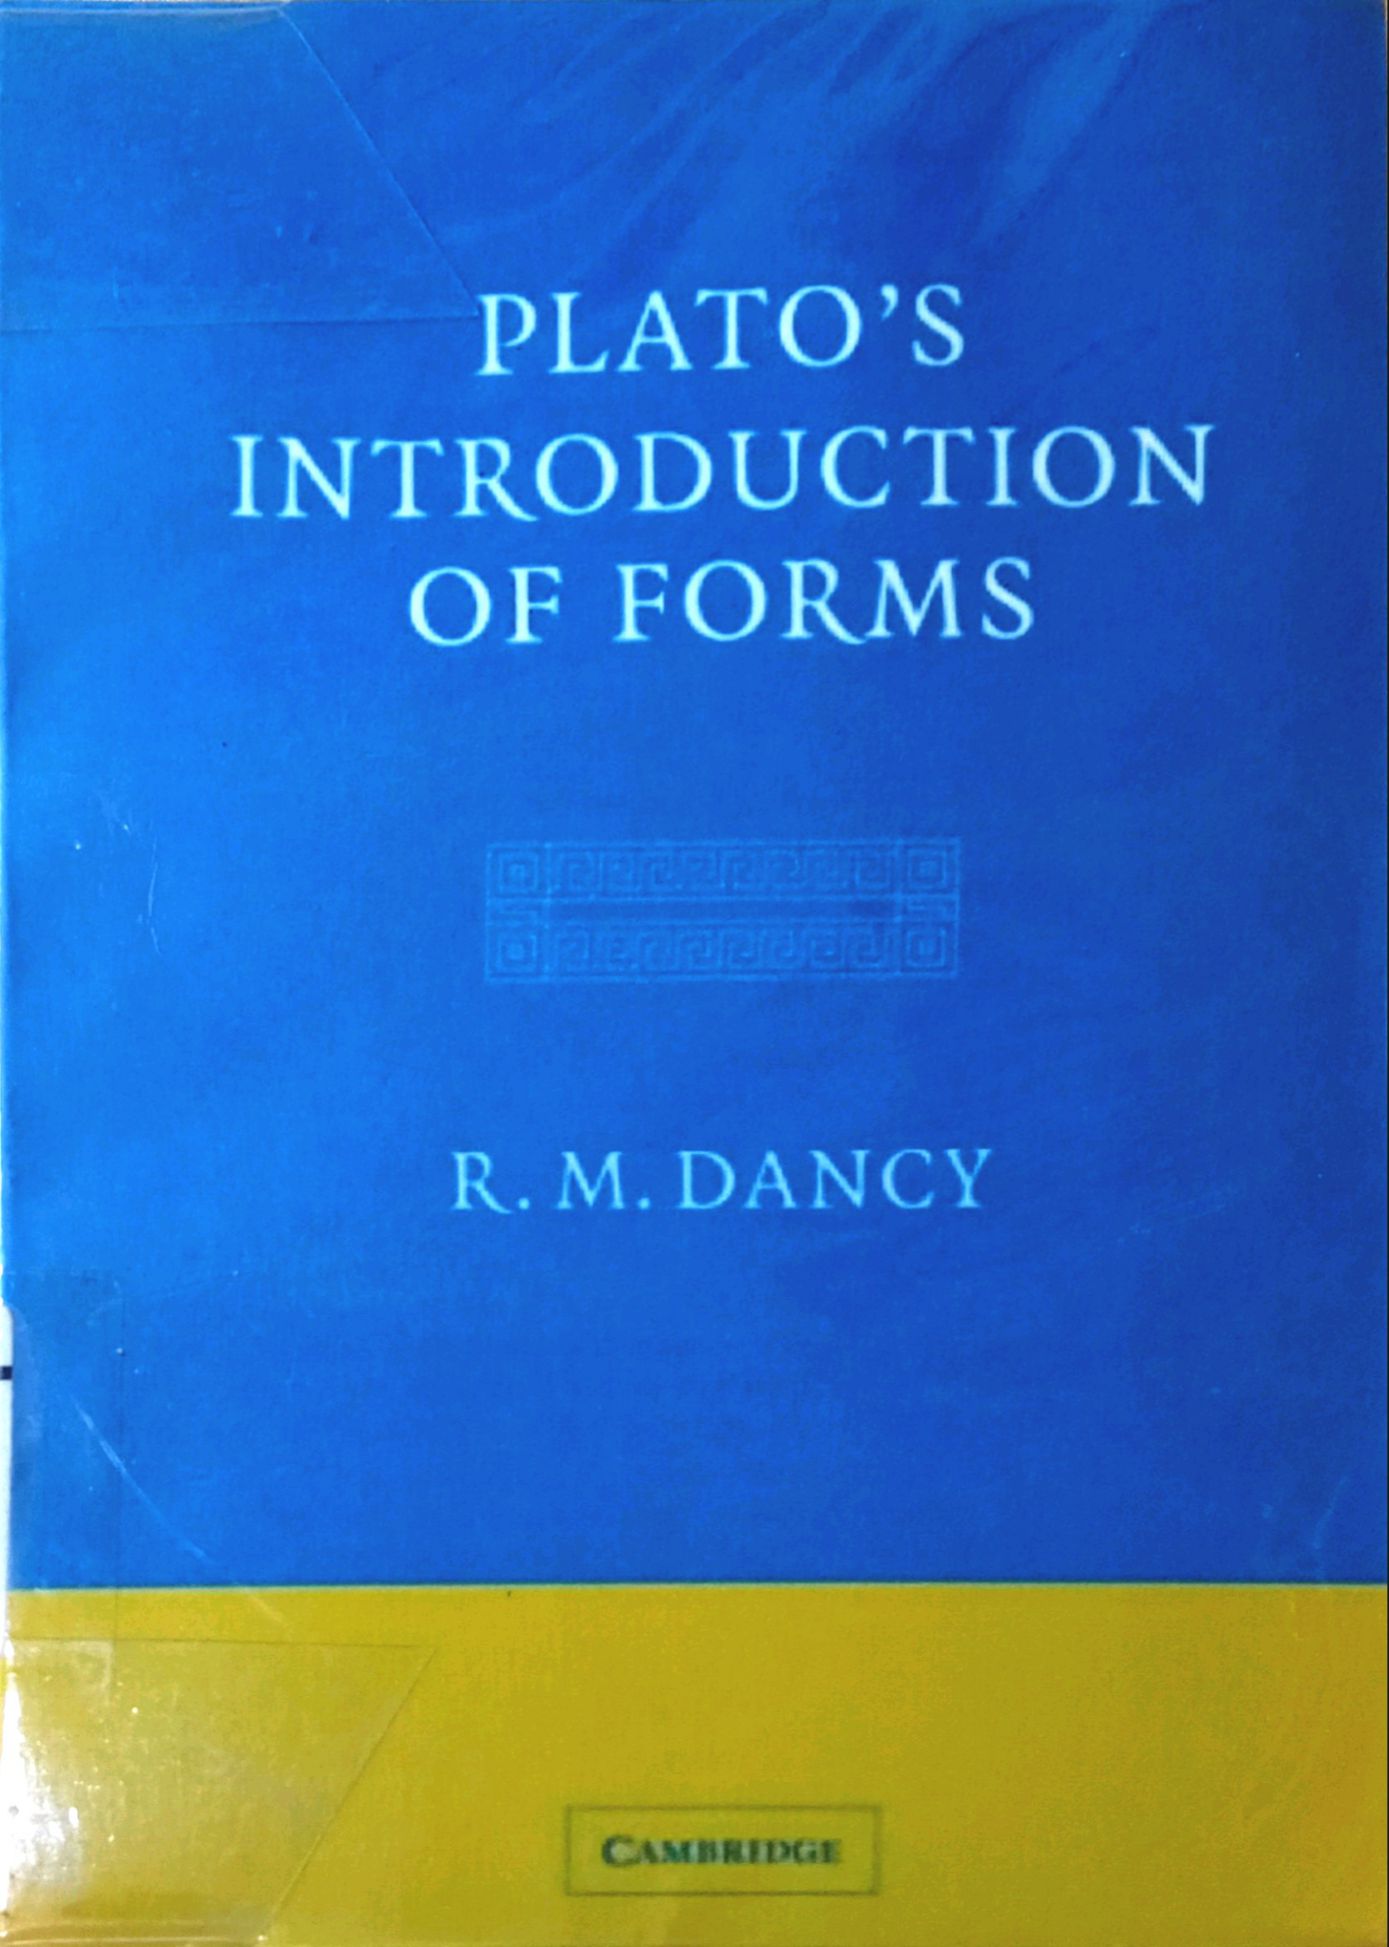 PLATO's INTRODUCTION OF FORMS